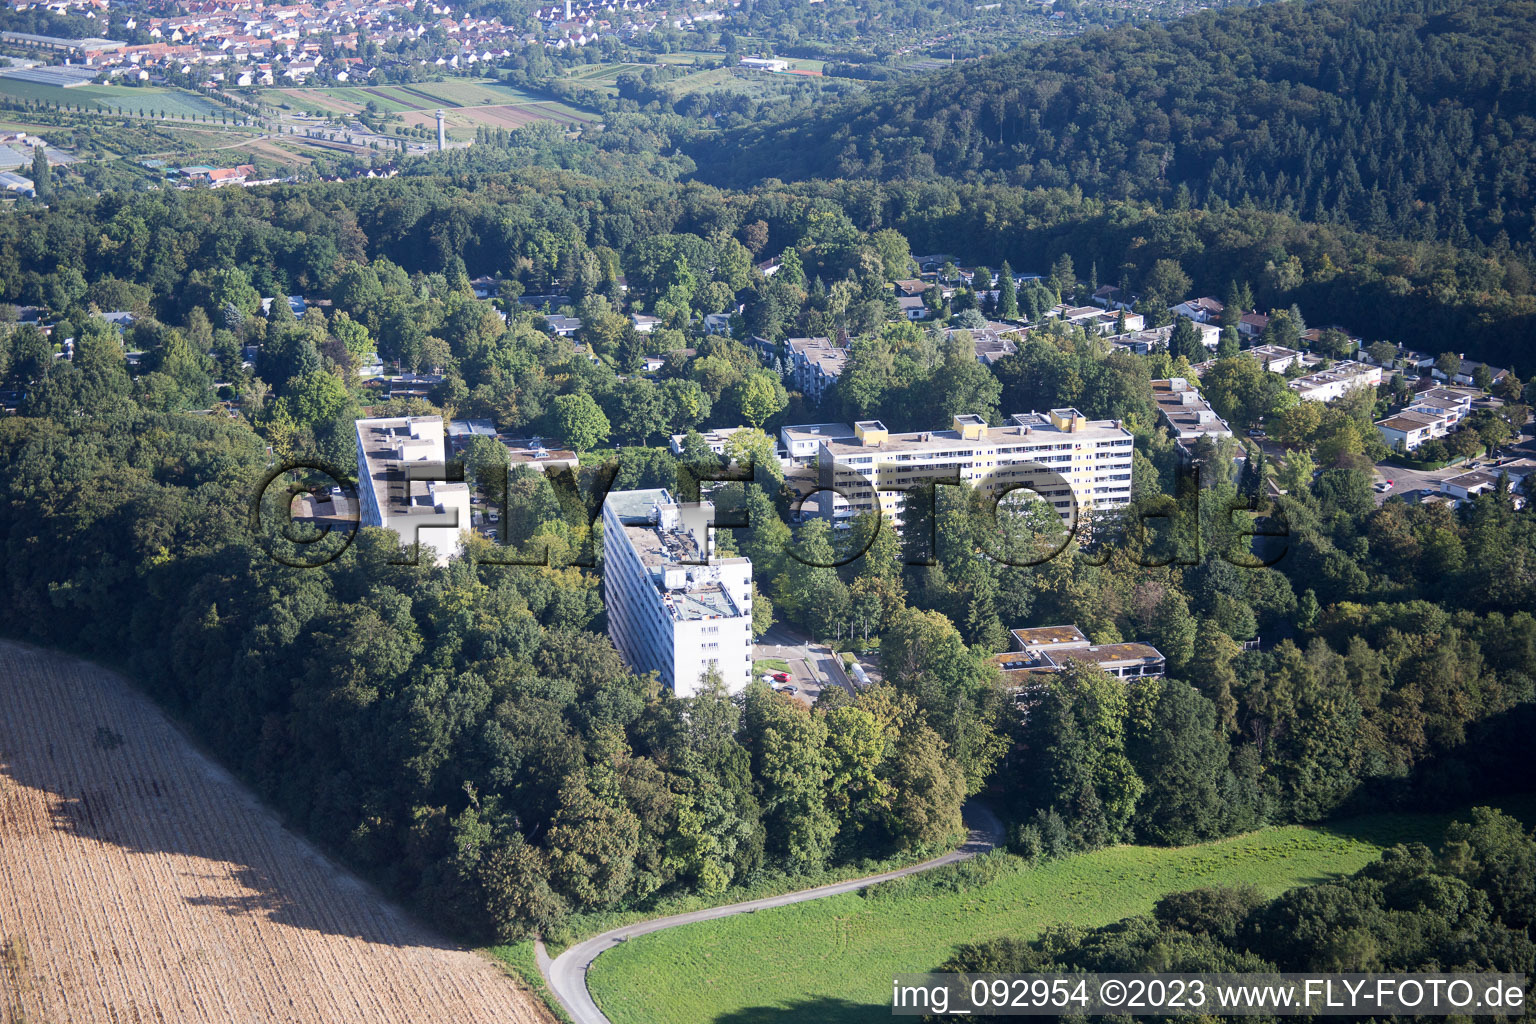 District Durlach in Karlsruhe in the state Baden-Wuerttemberg, Germany from a drone